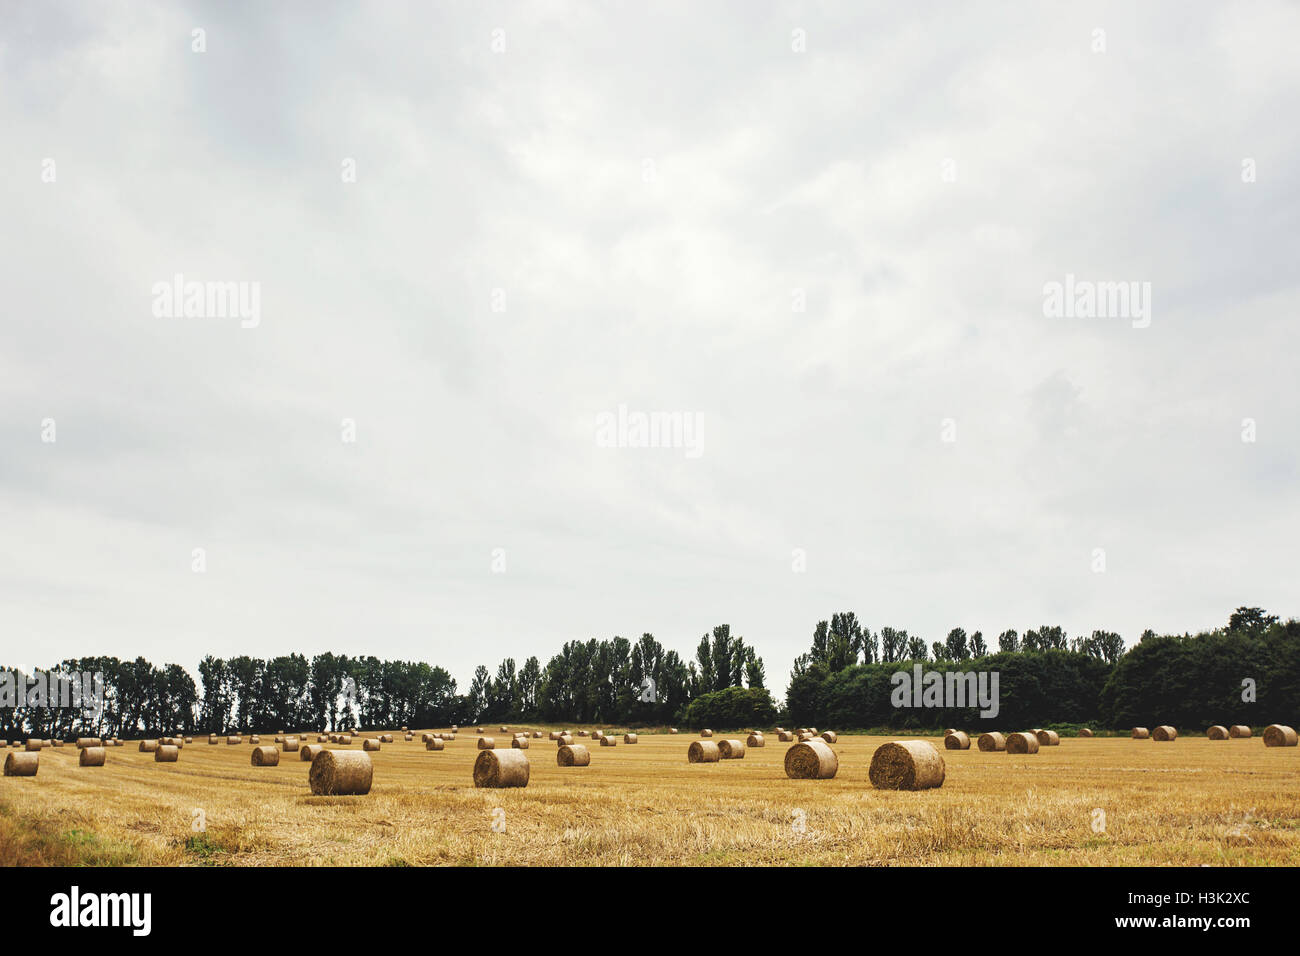 Field with bales of straw, Gillingham, Kent, England Stock Photo